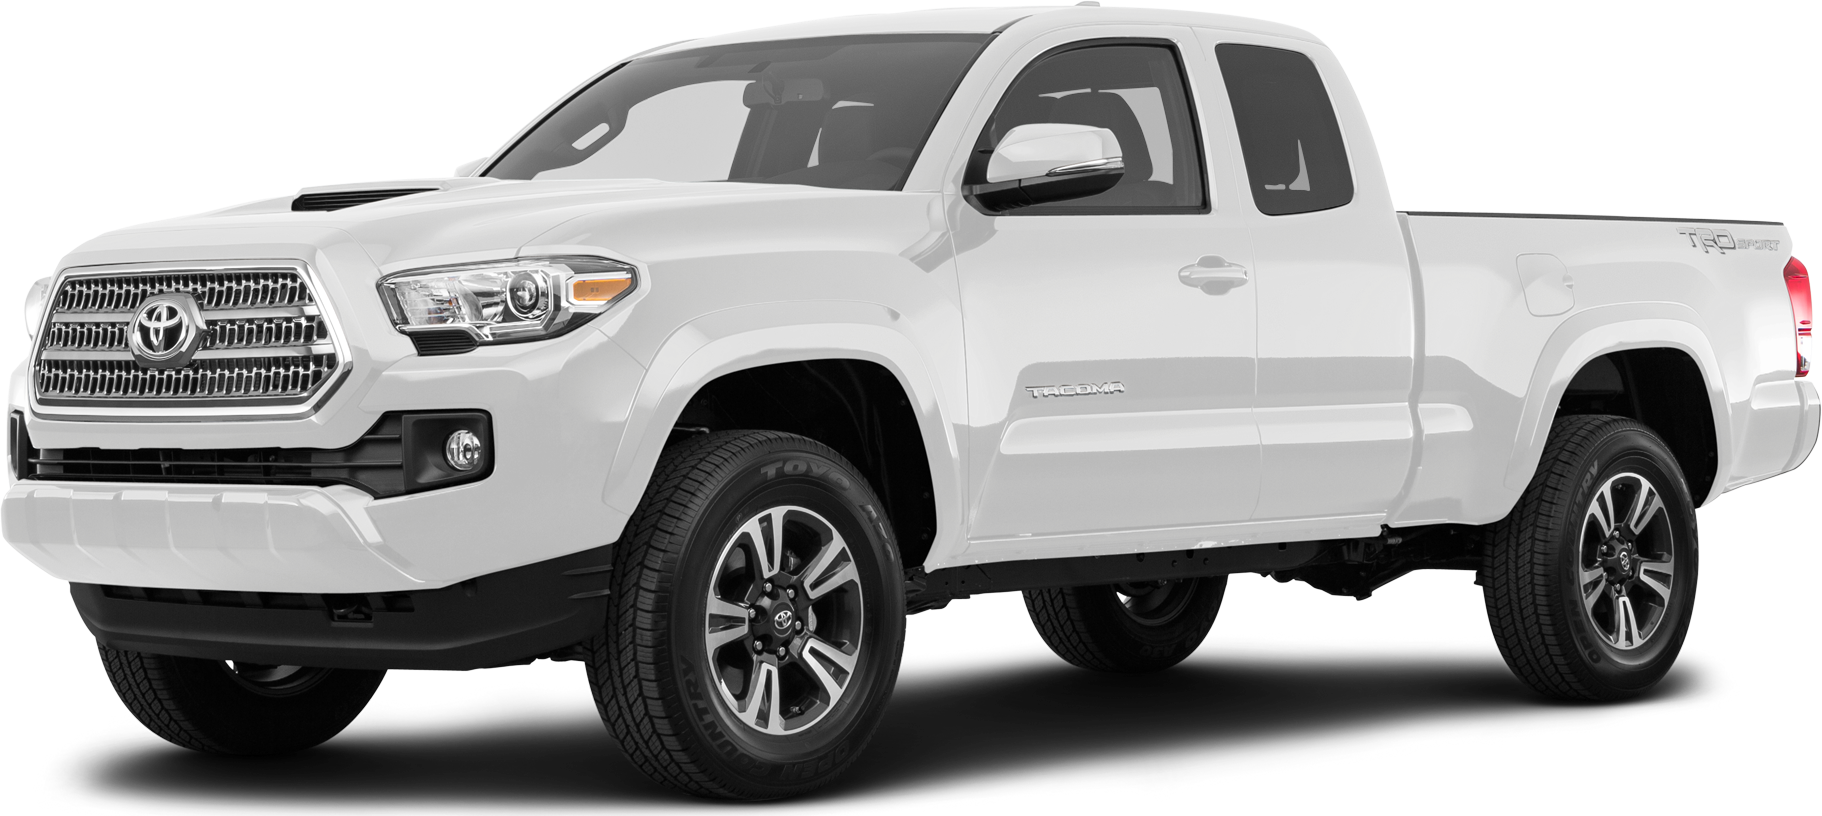 2019 Toyota Tacoma Values & Cars for Sale | Kelley Blue Book